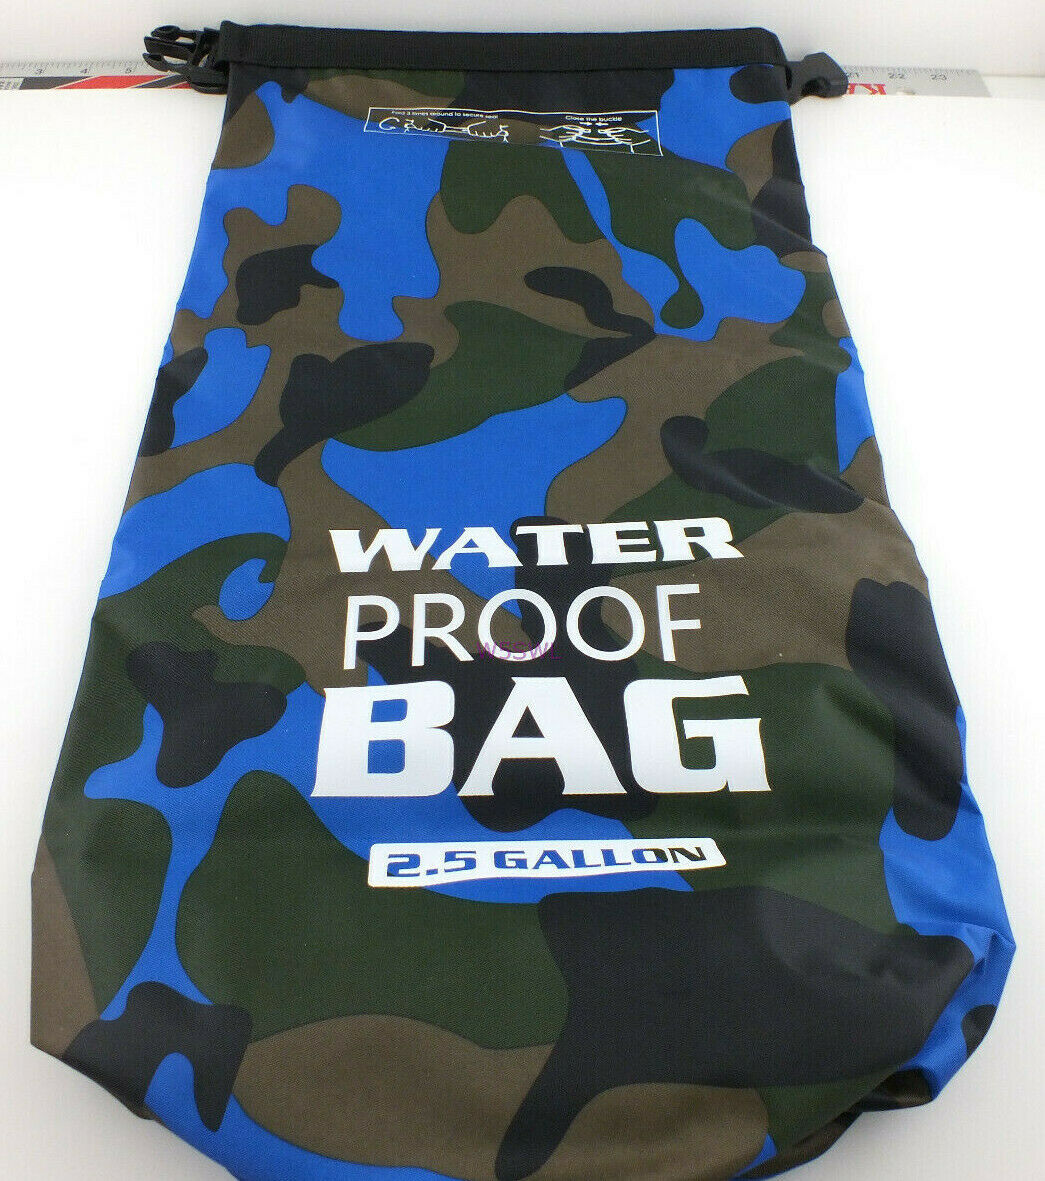 Camping Bag Hiking 2-1/2 Gallon Blue Camo Waterproof Roll Top Rip Stop - Dave's Hobby Shop by W5SWL